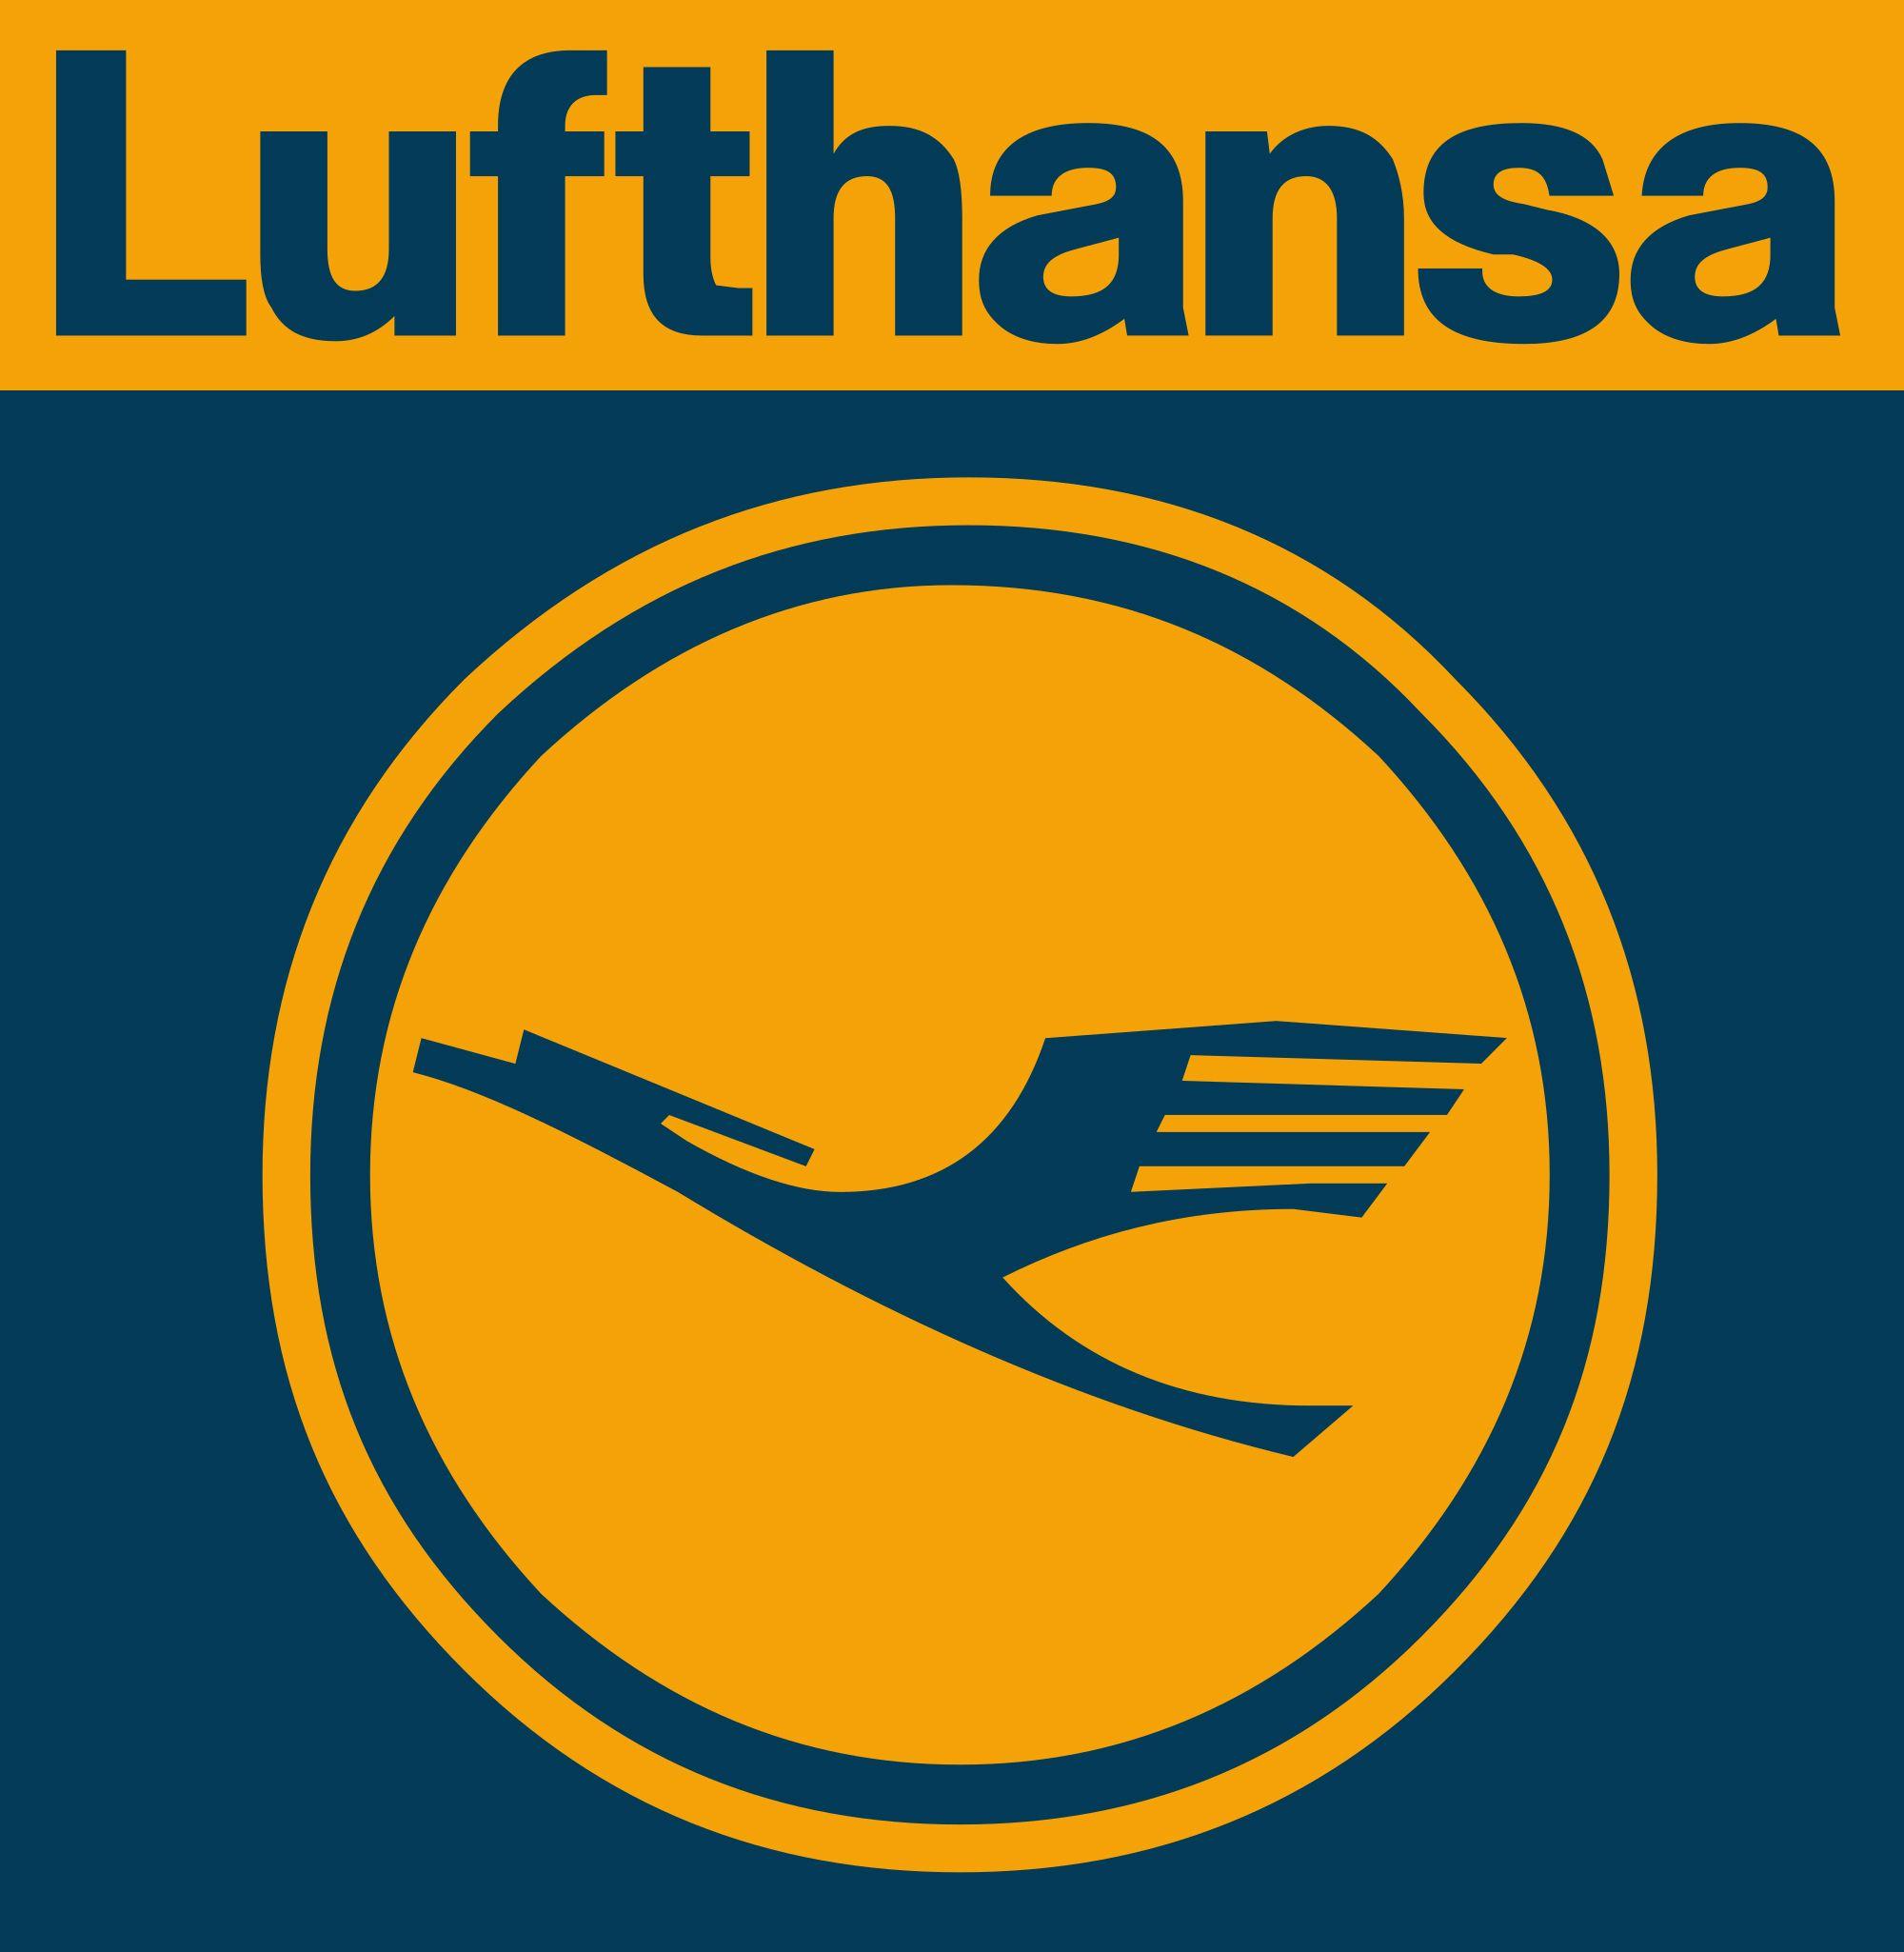 Lufthansa Logo - Lufthansa Logo, Lufthansa Symbol Meaning, History and Evolution